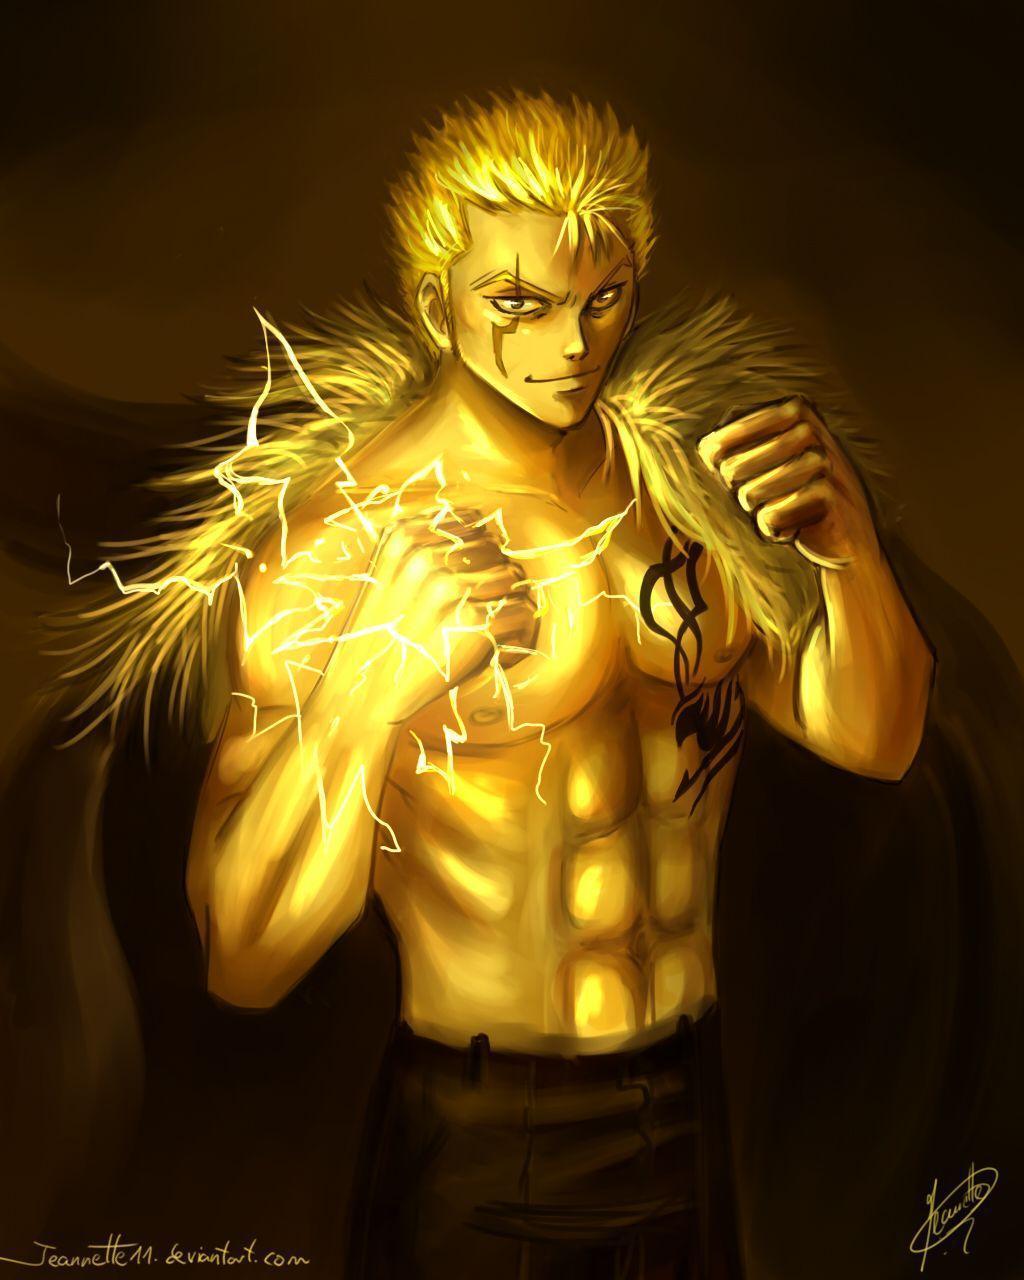 image about Fairy Tail:Laxus. Fairytail